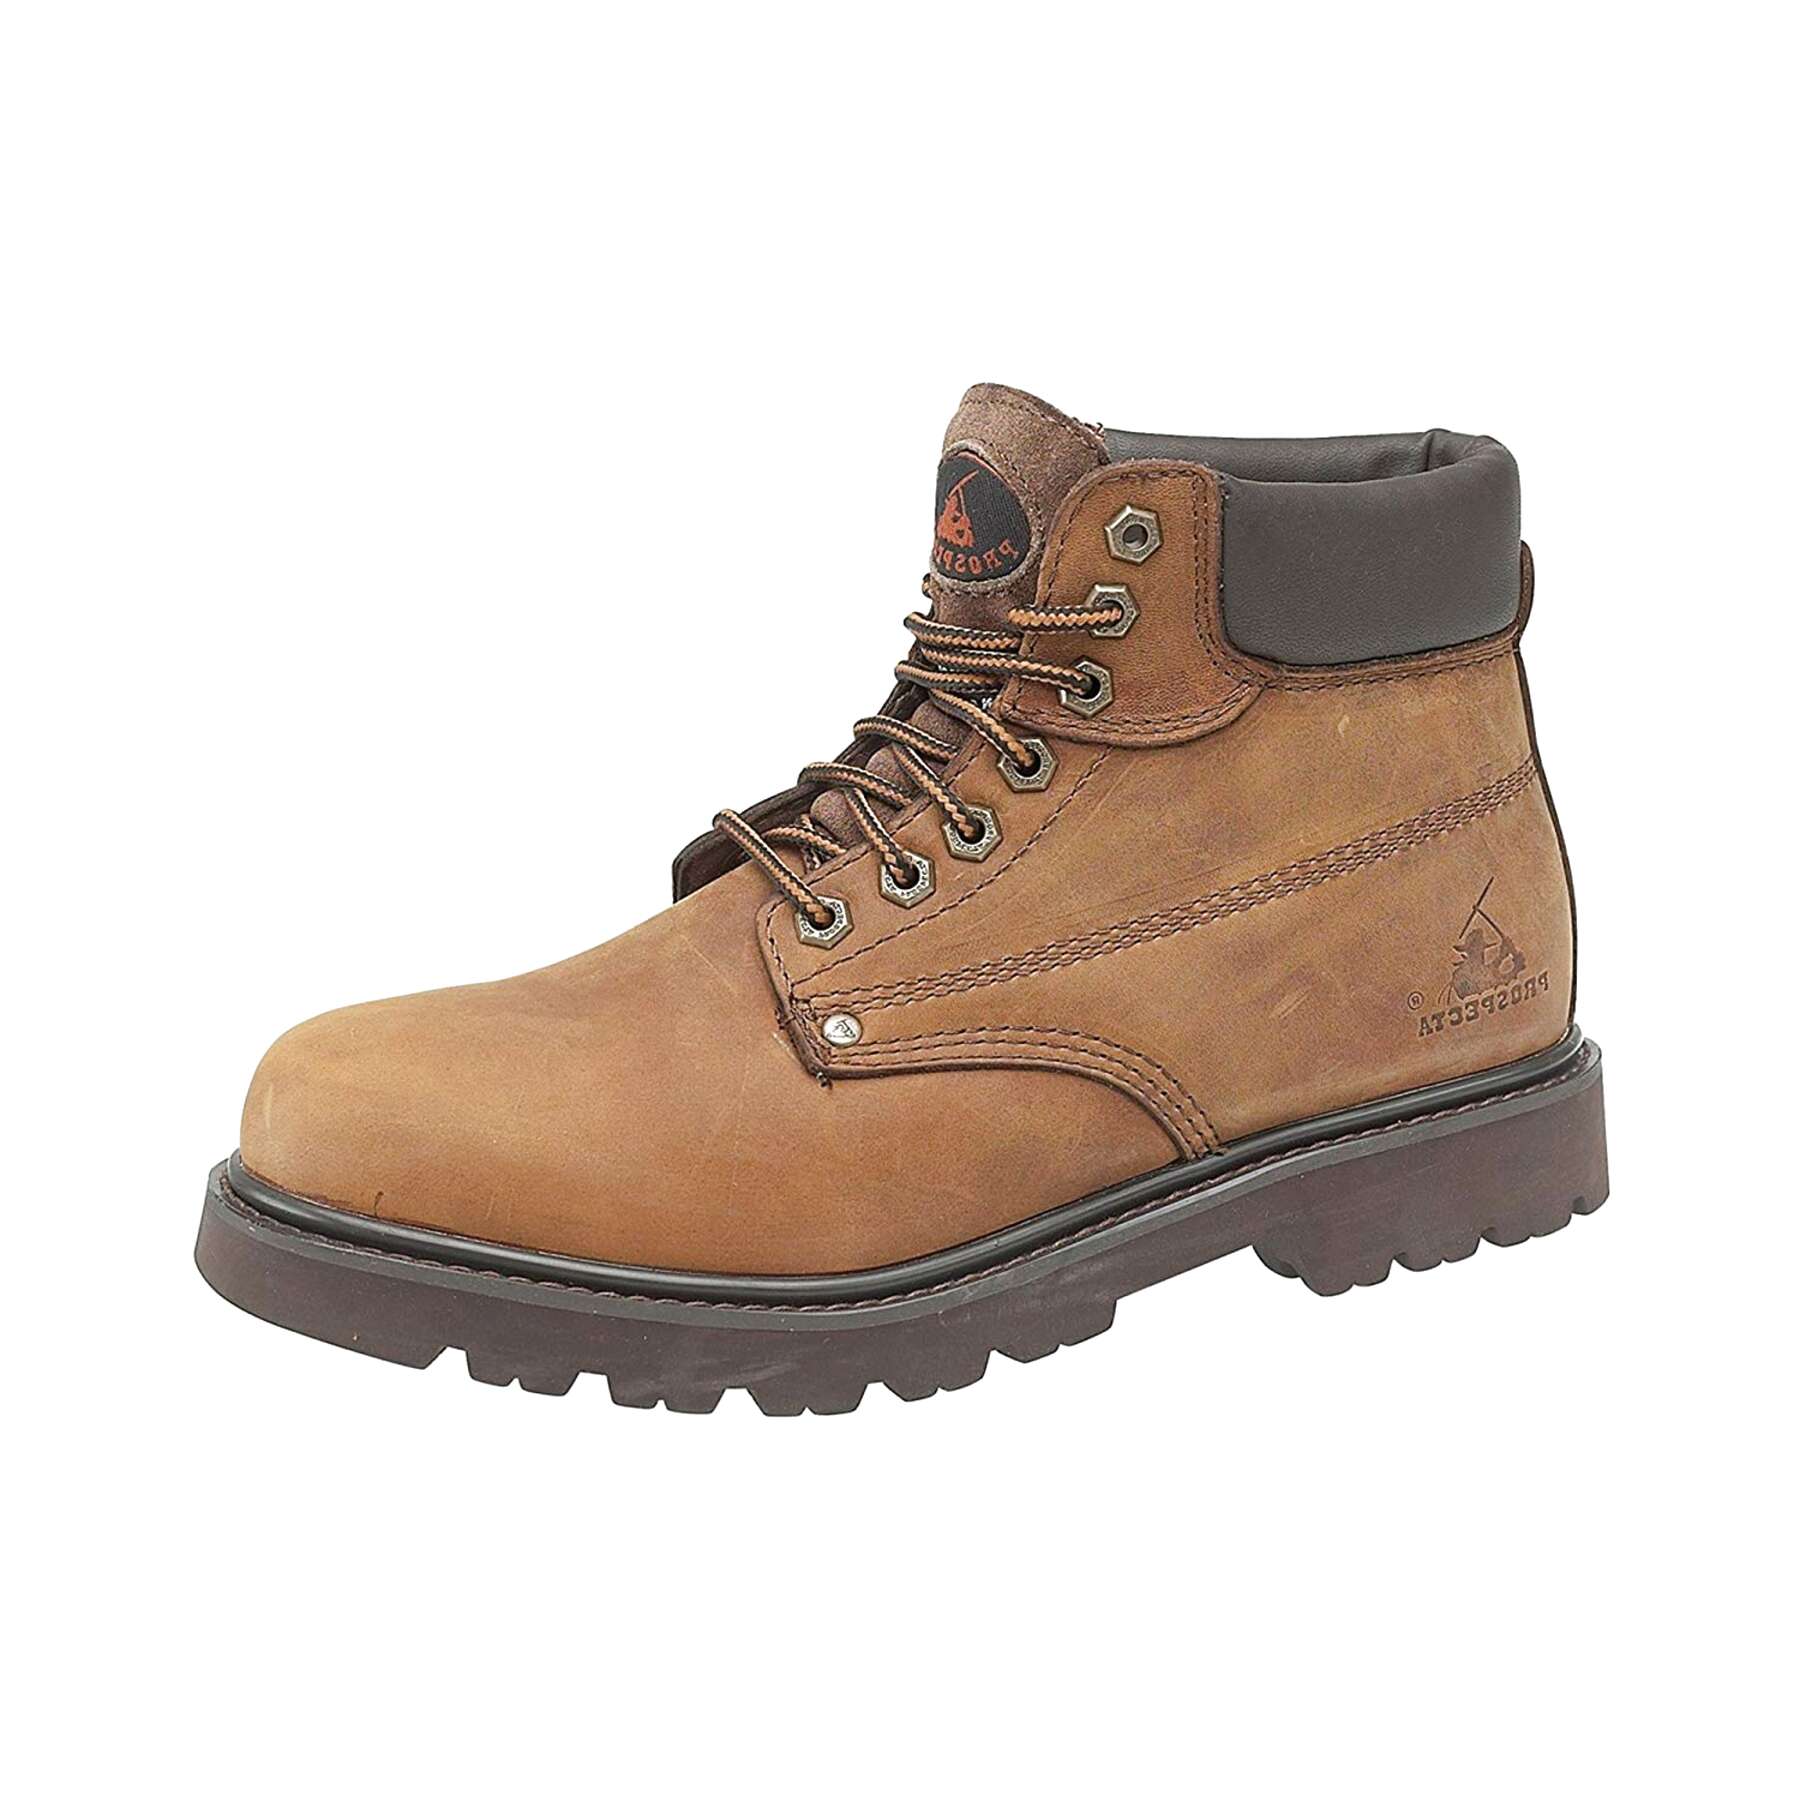 Prospecta Boots for sale in UK | 14 used Prospecta Boots